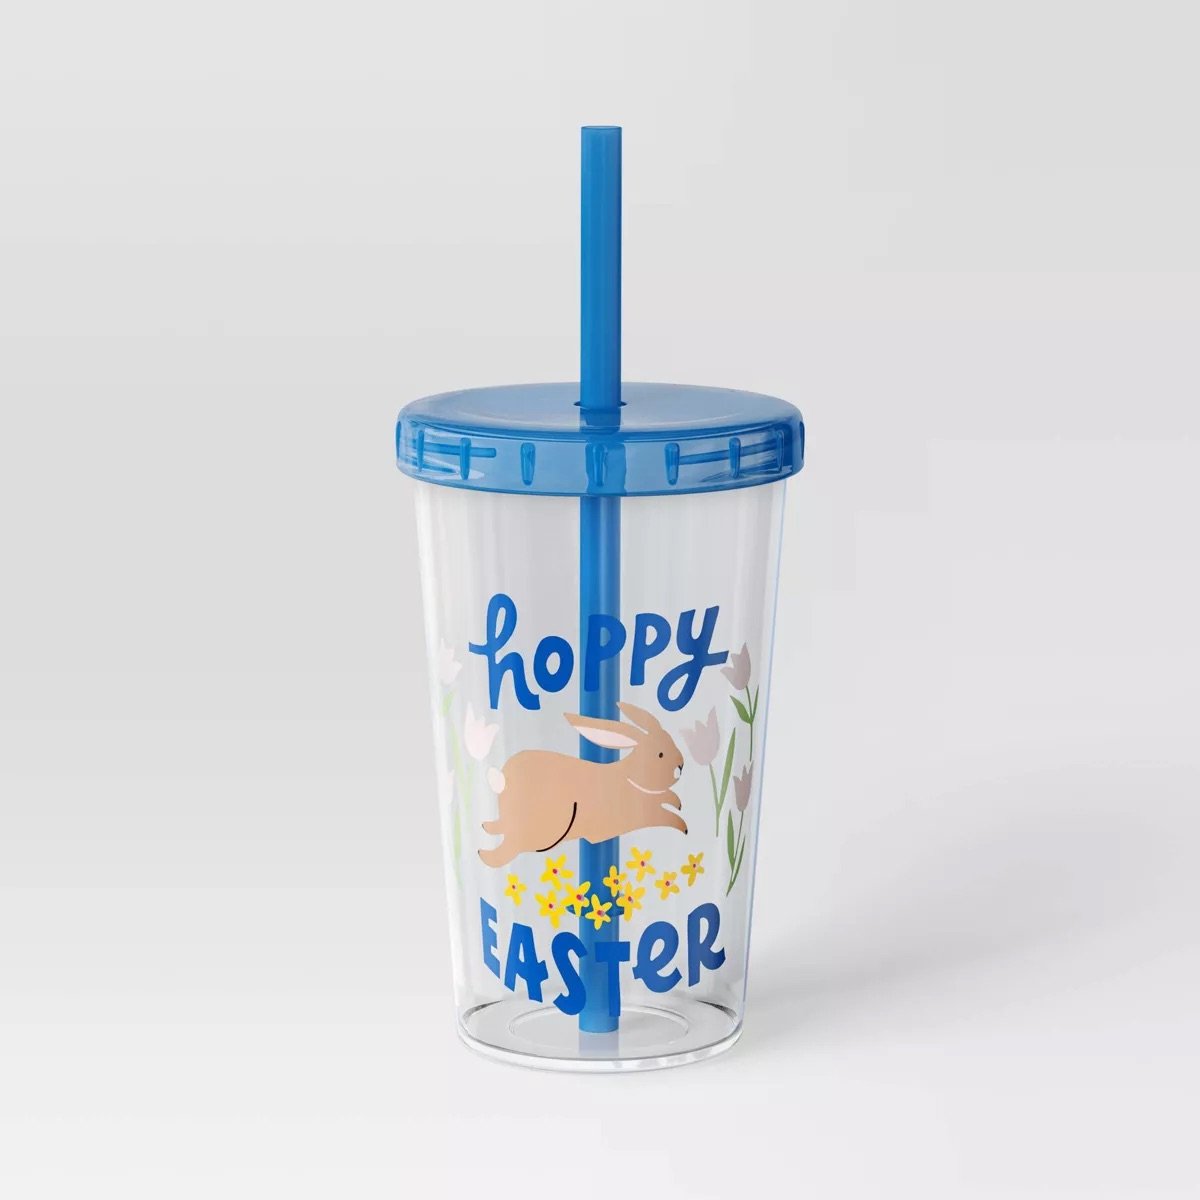 12oz Hoppy Easter Tumbler with Straw Room Essentials.jpeg